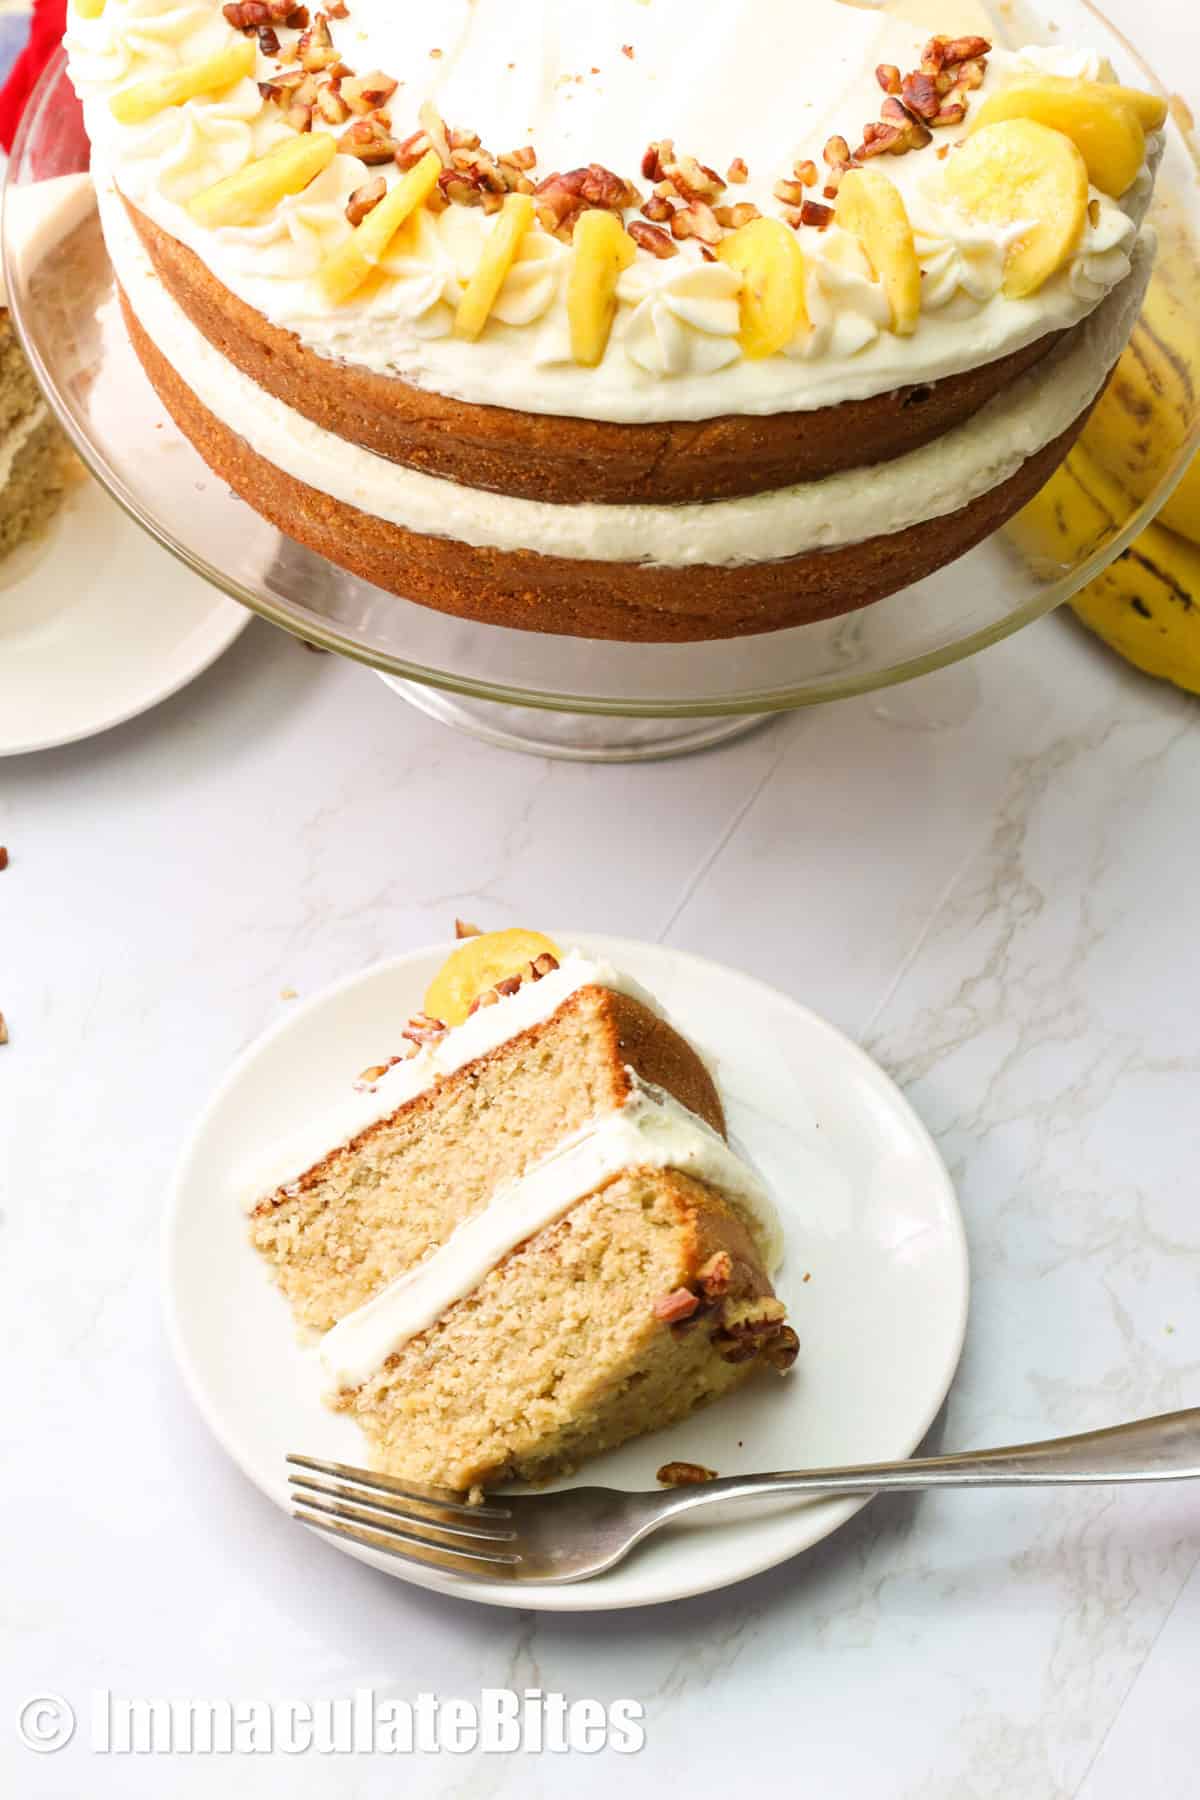 Banana Cake with a slice removed